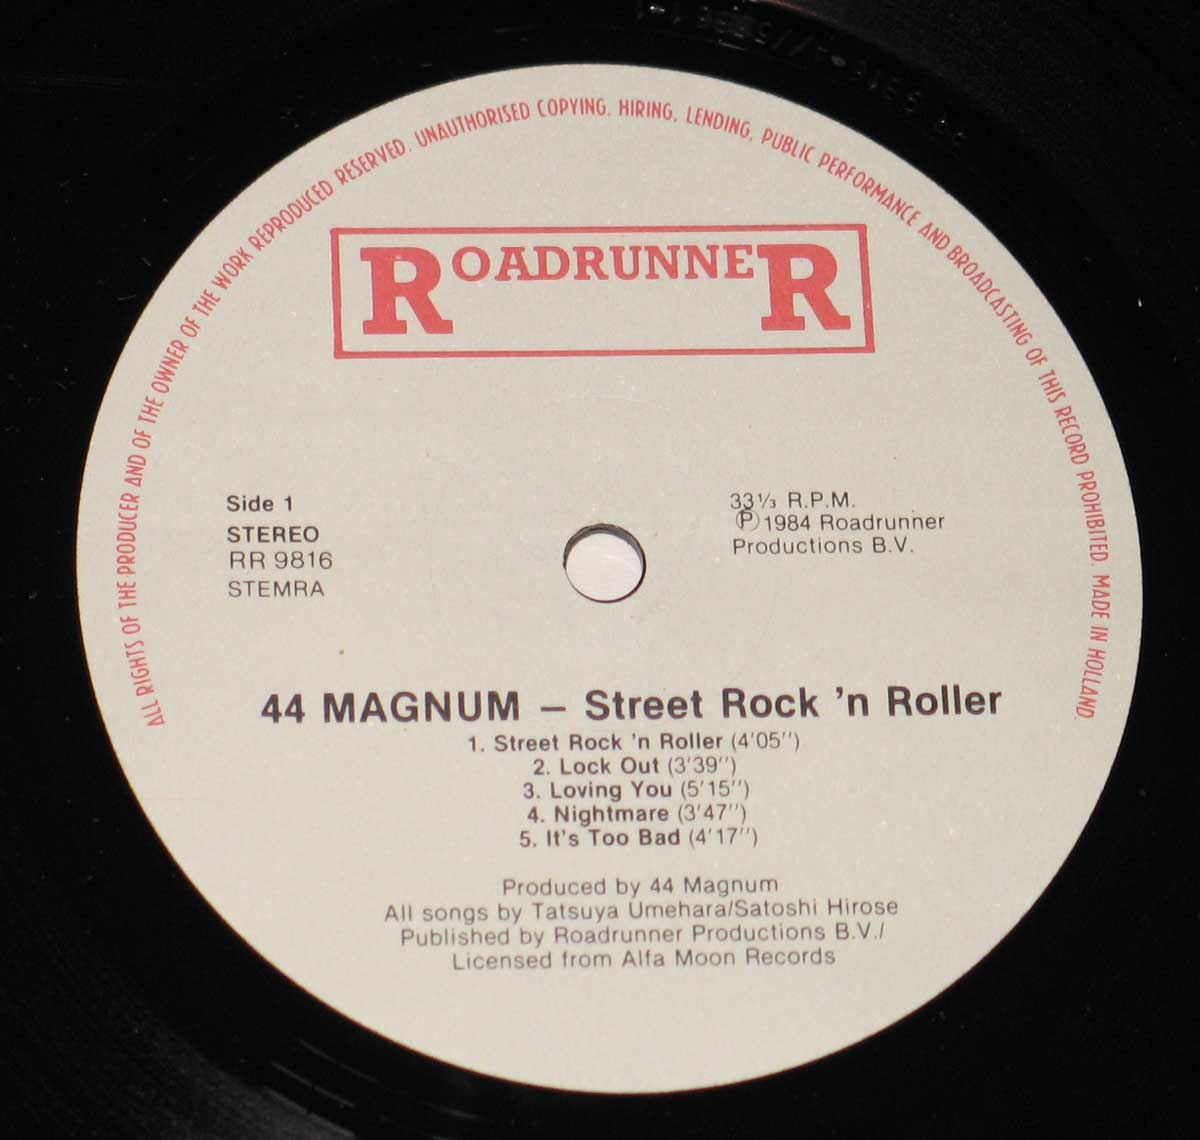 Enlarged High Resolution Photo of the Record's label 44 MAGNUM - Street Rock 'n Roller https://vinyl-records.nl